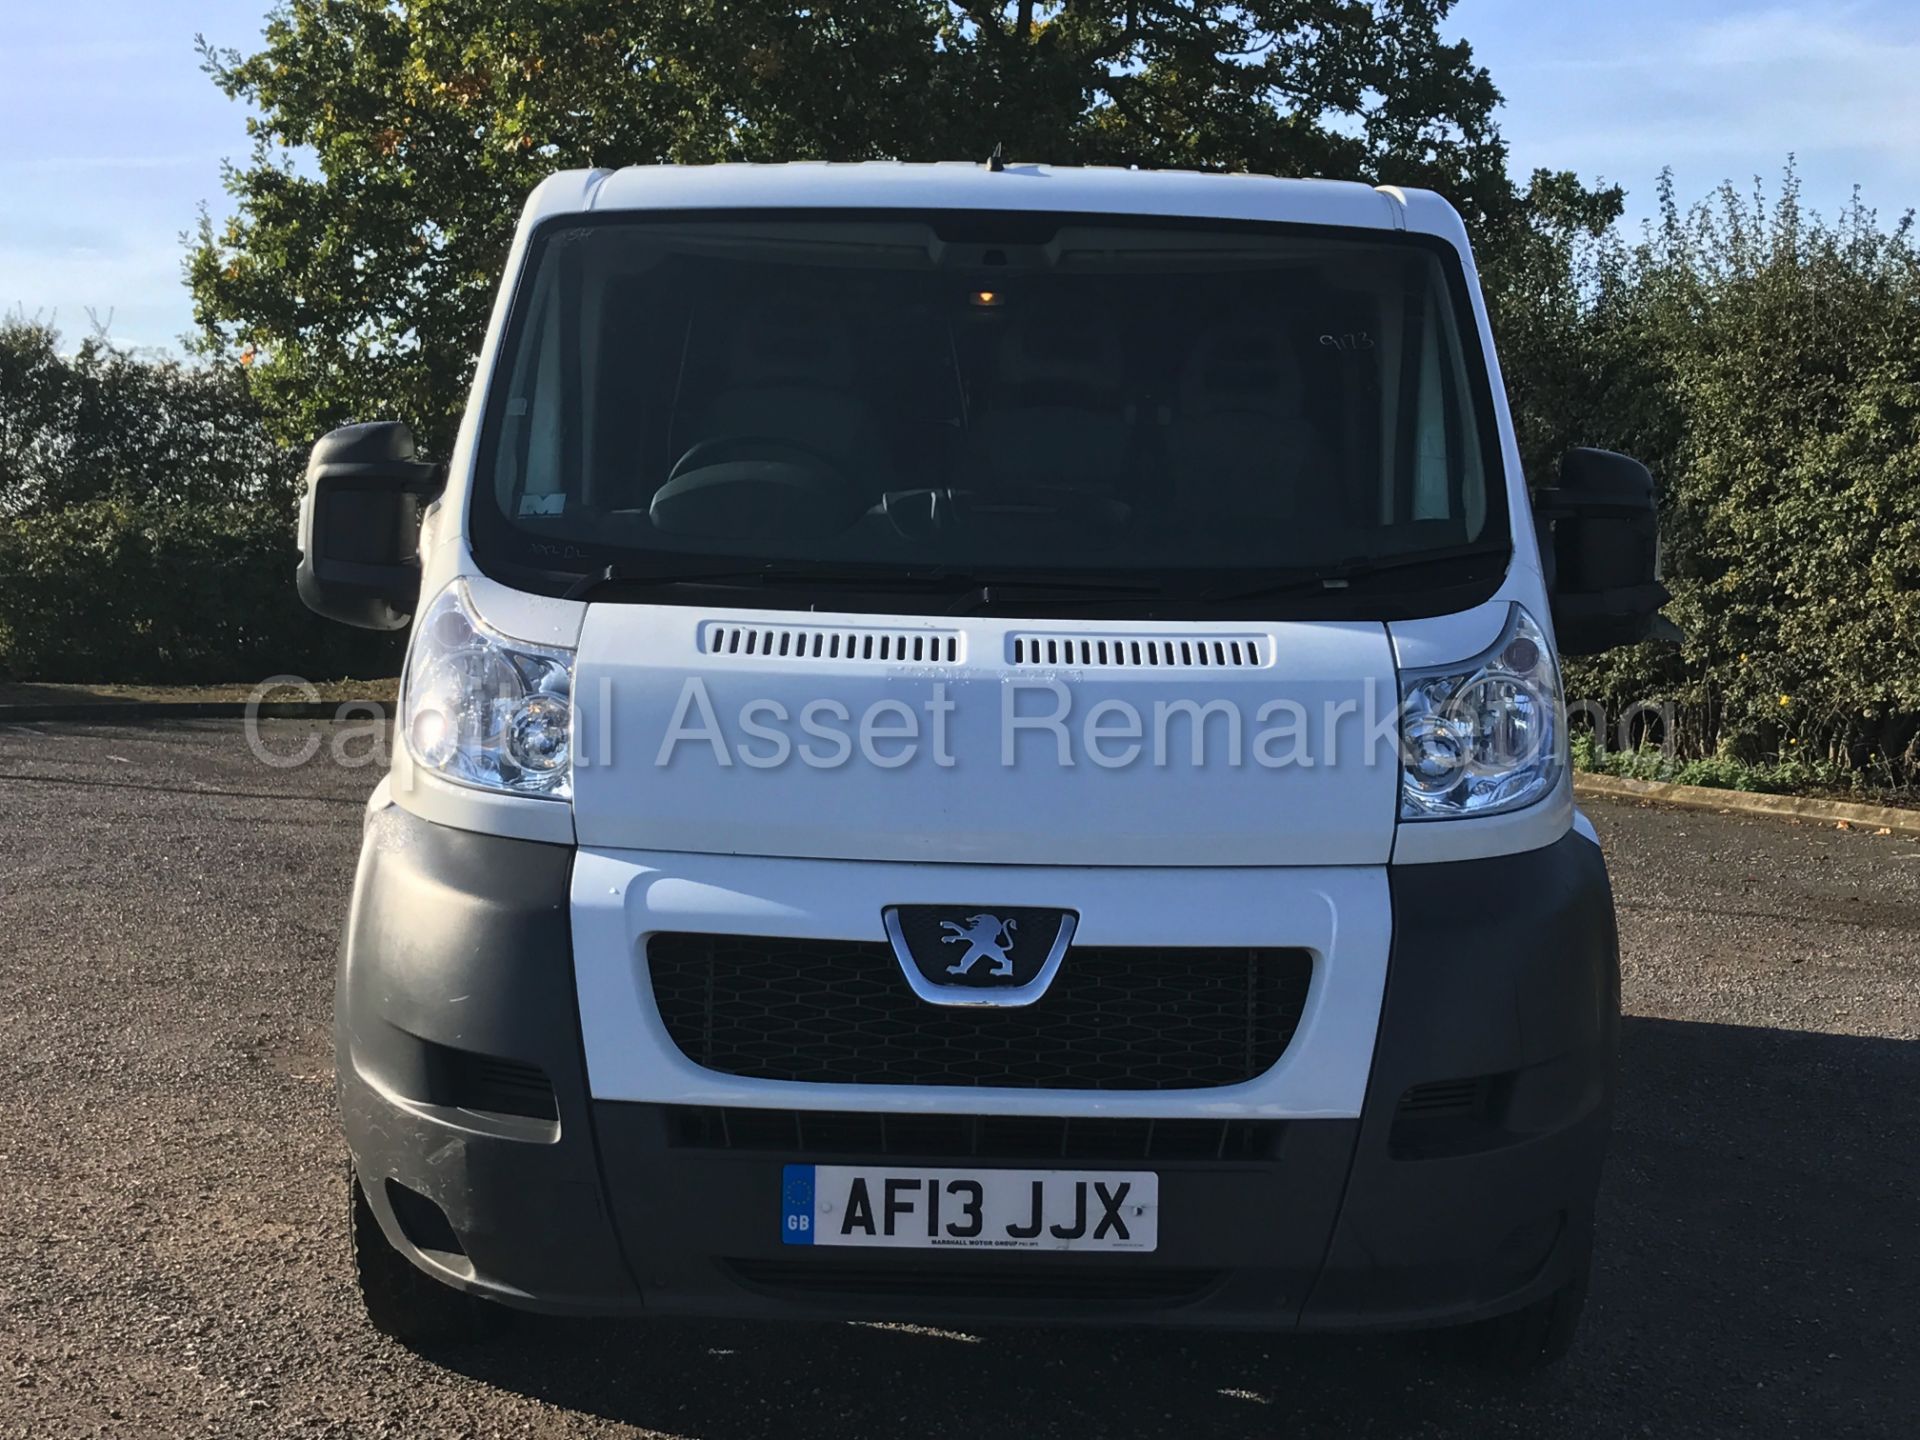 PEUGEOT BOXER 330 L1H1 (2013 - 13 REG) 'SWB - 2.2 HDI - 6 SPEED' (1 OWNER FROM NEW) **LOW MILES** - Image 3 of 19